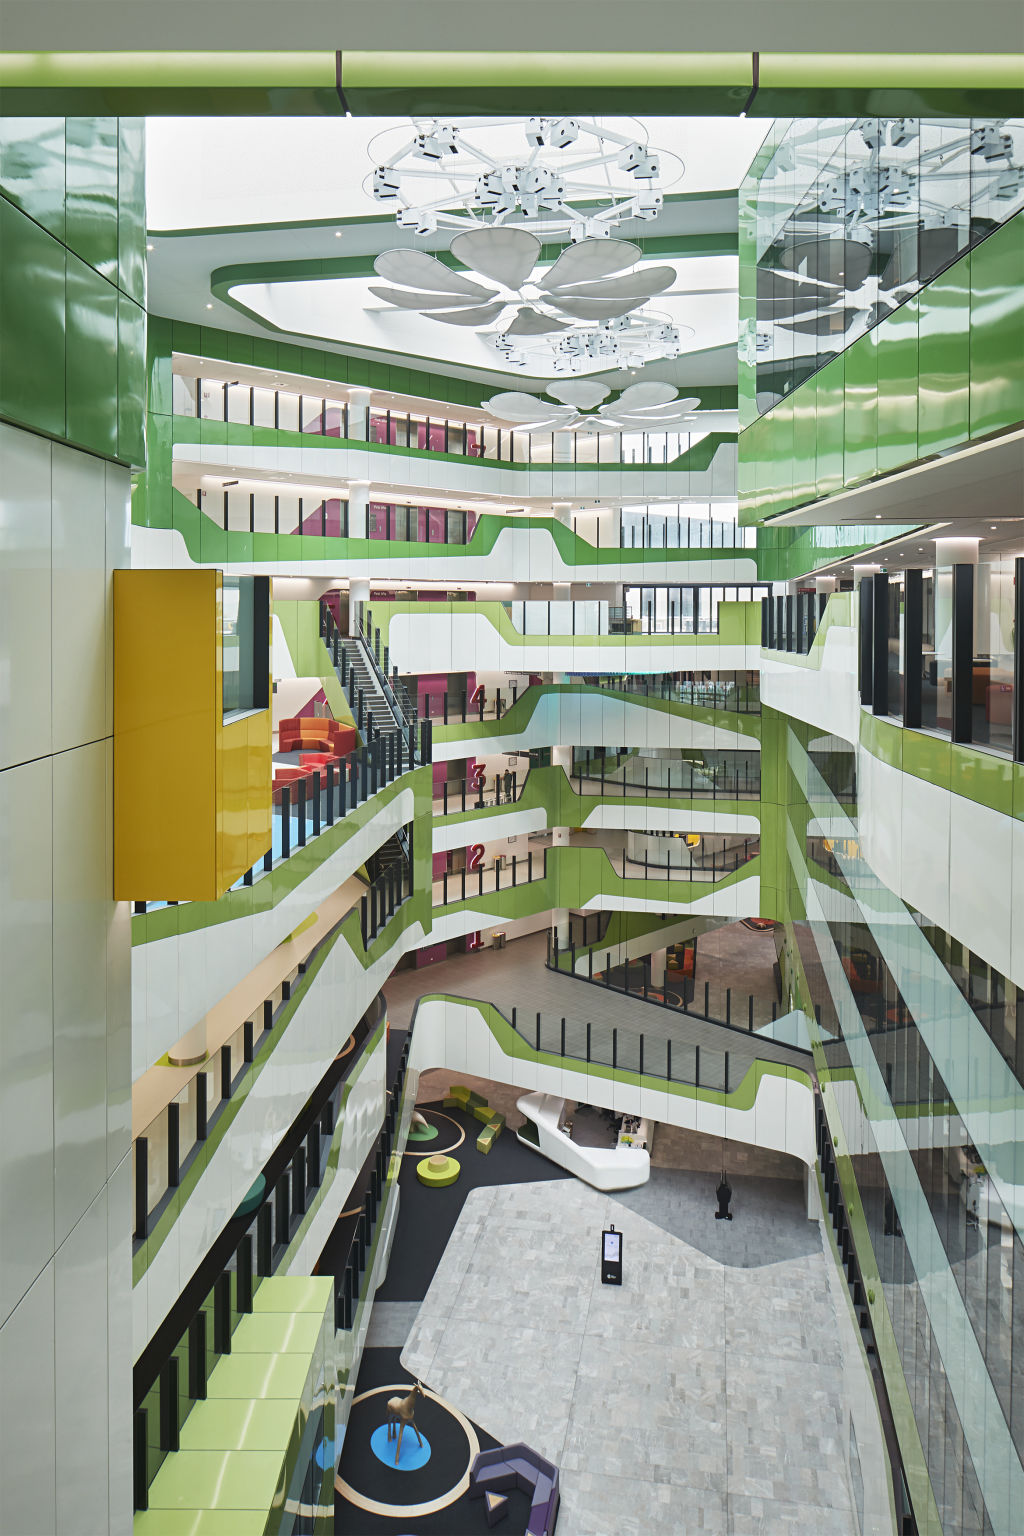 The hospital won plaudits for its design that engaged all users. Photo: Shannon McGrath